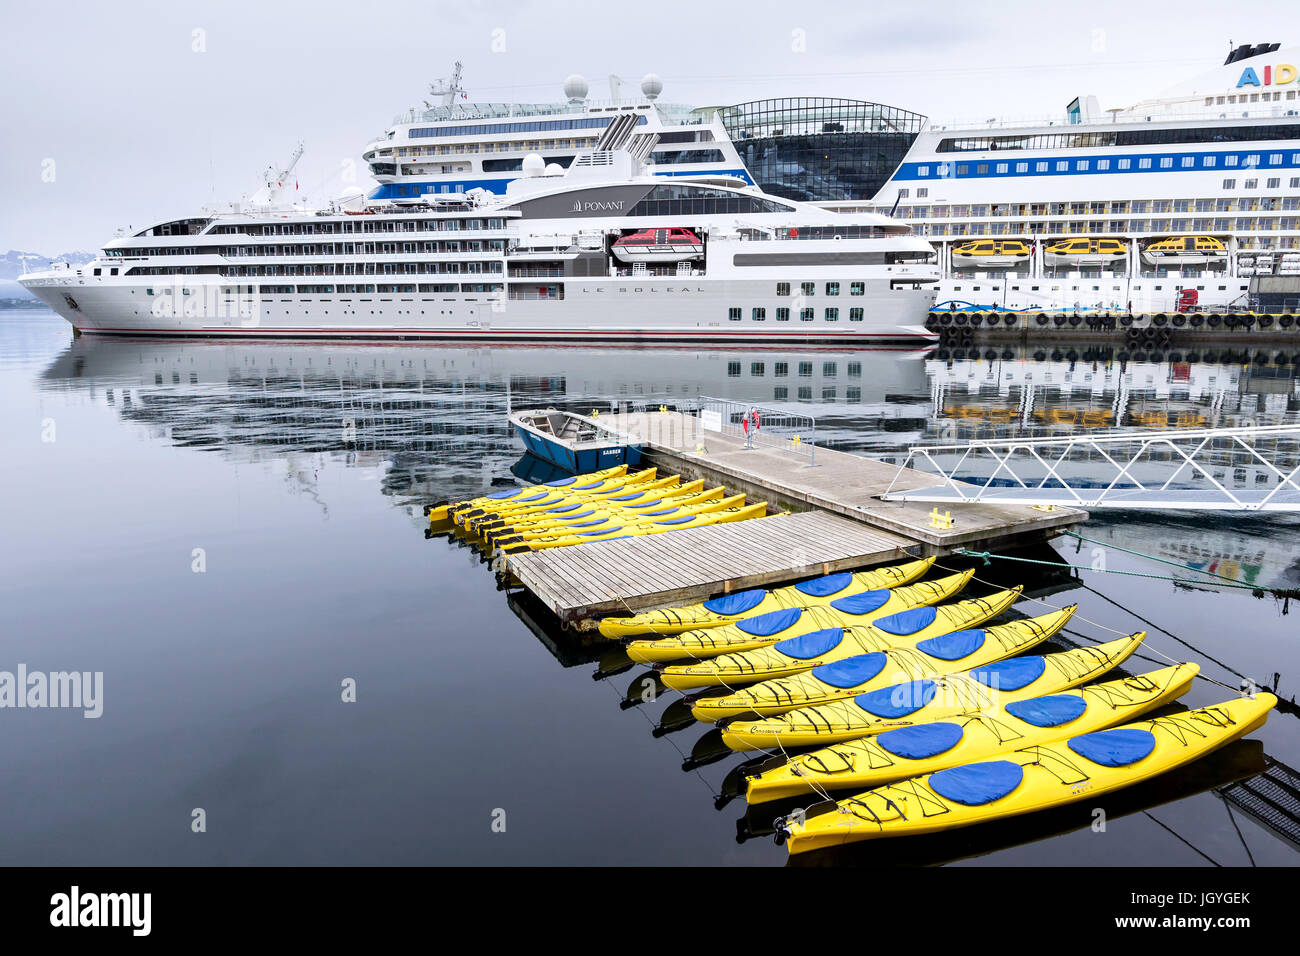 Cruise ships and kayaks in Alesund. Alesund is noted for its concentration of Art Nouveau architecture and therefore a popular cruise destination. Stock Photo